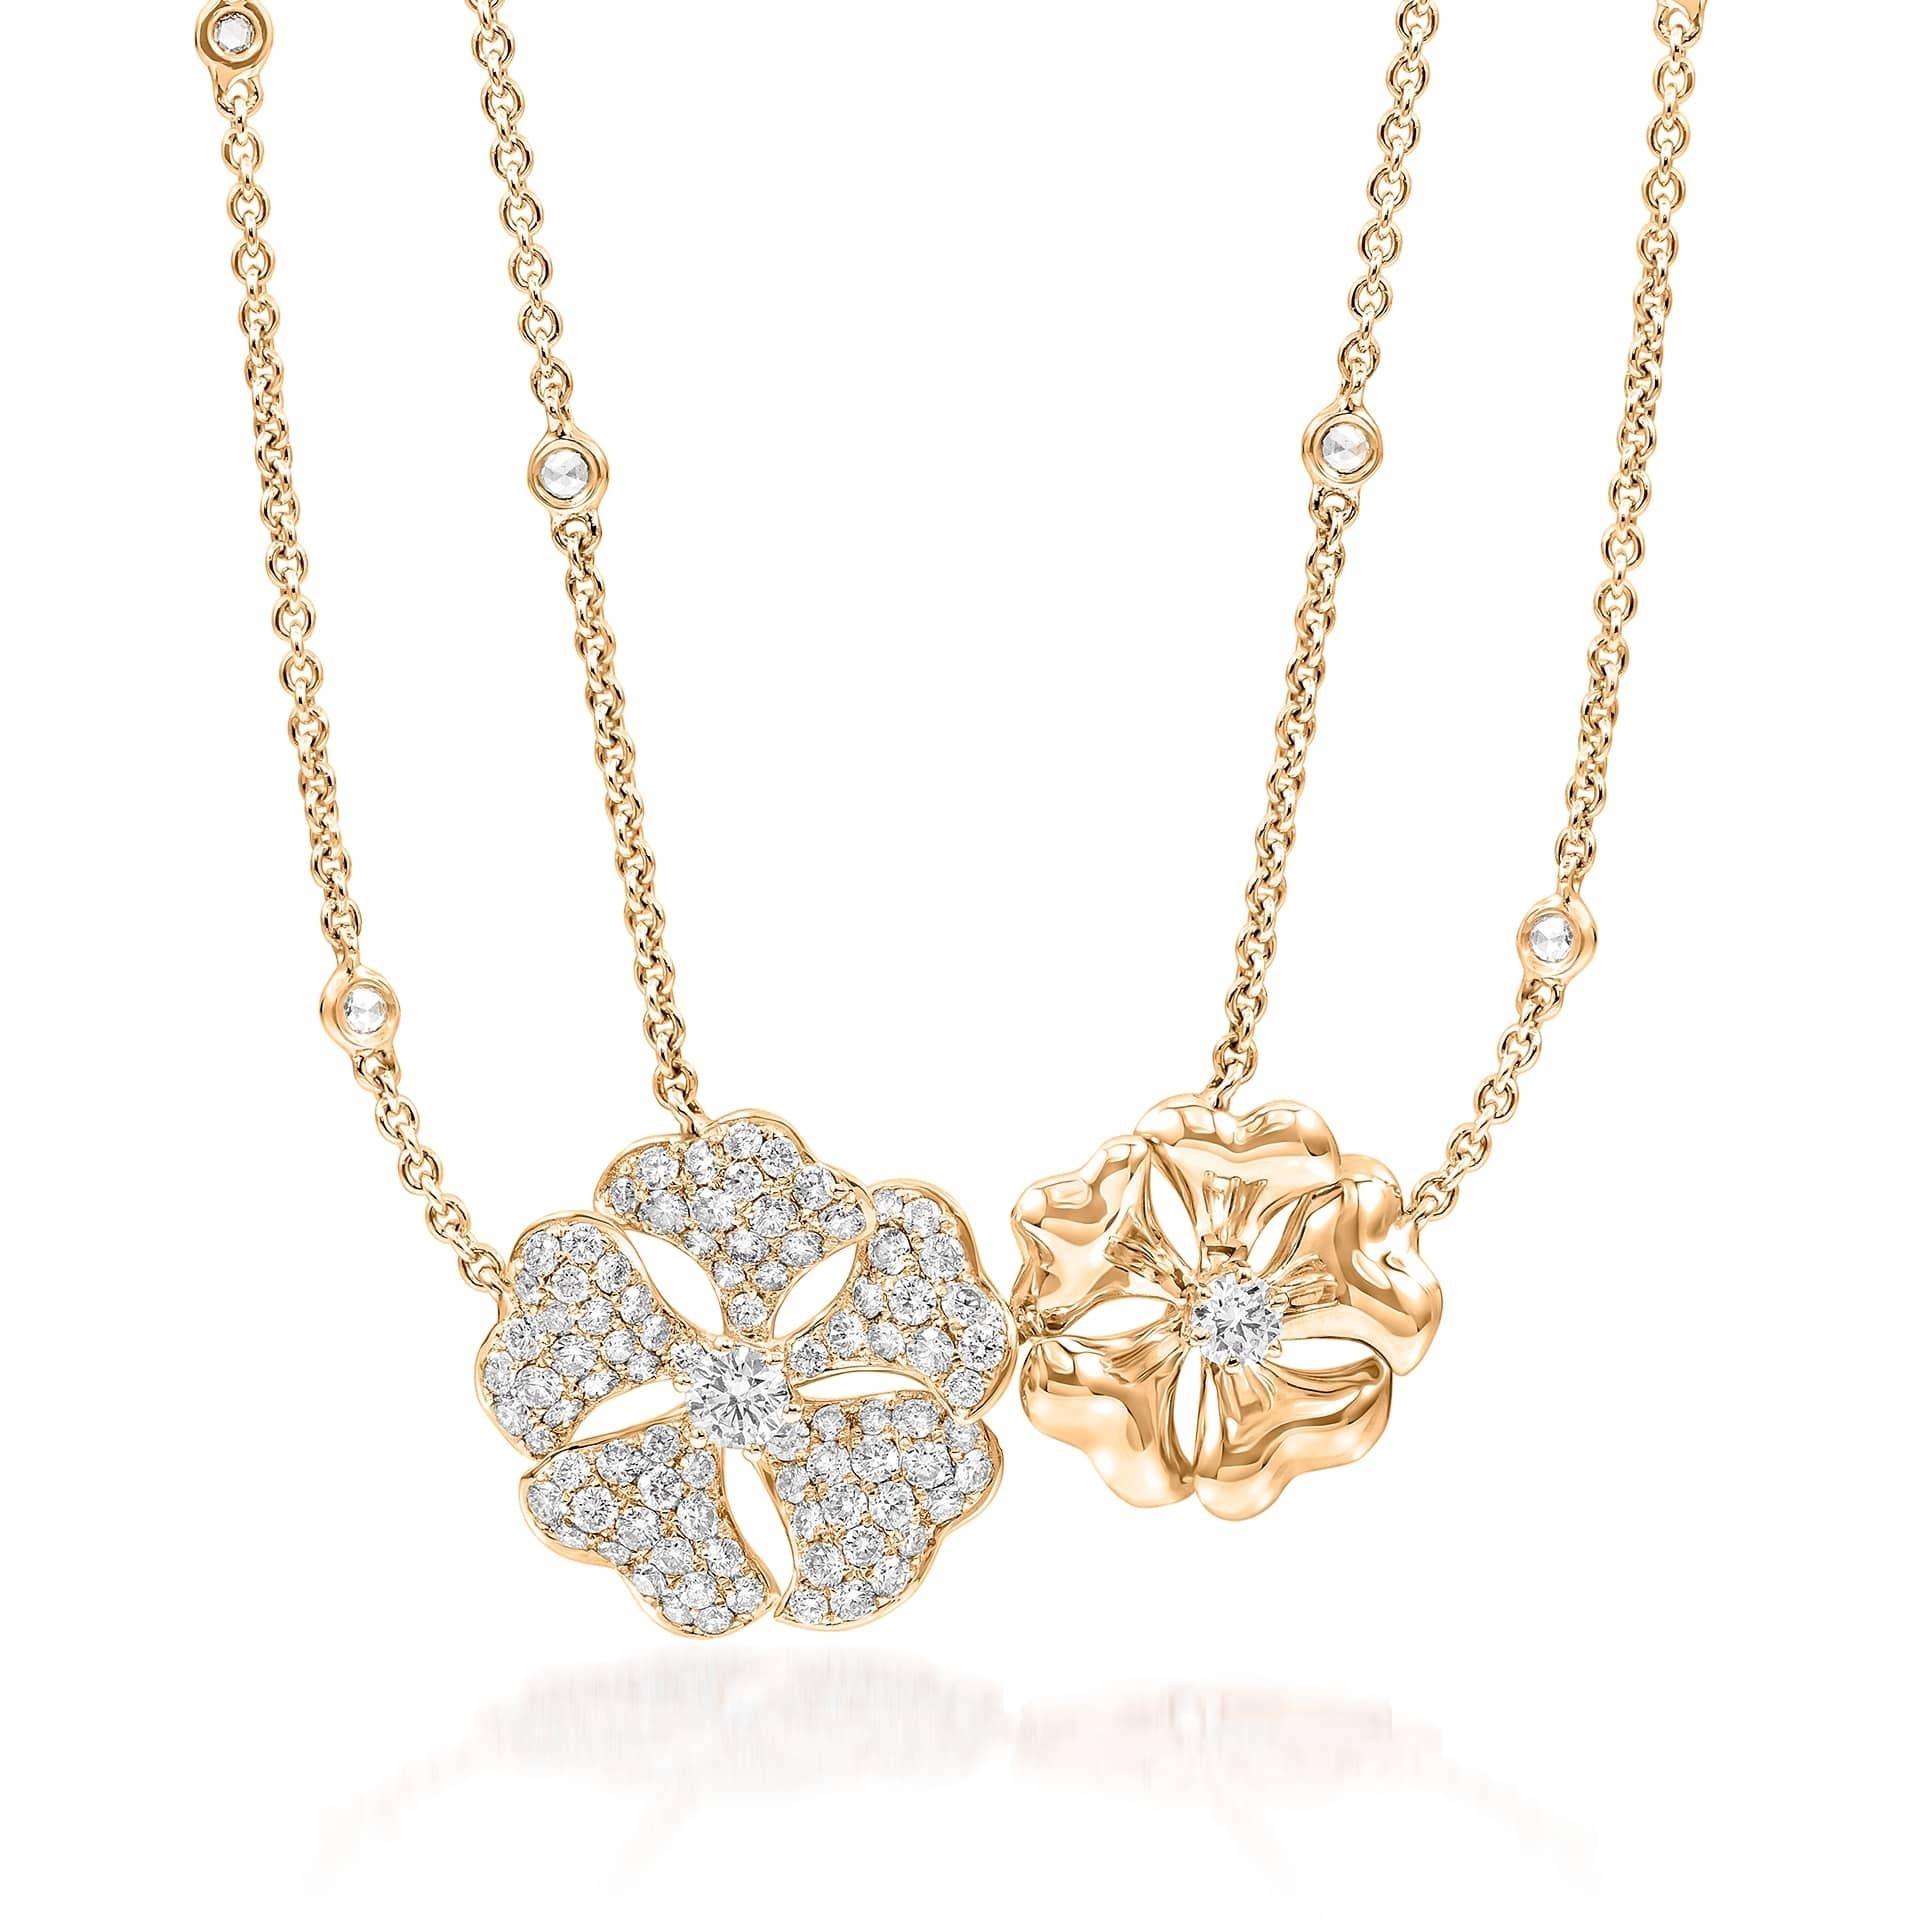 Bloom Diamond Cluster Flower Necklace in 18K Yellow Gold

Inspired by the exquisite petals of the alpine cinquefoil flower, the Bloom collection combines the richness of diamonds and precious metals with the light versatility of this delicate,